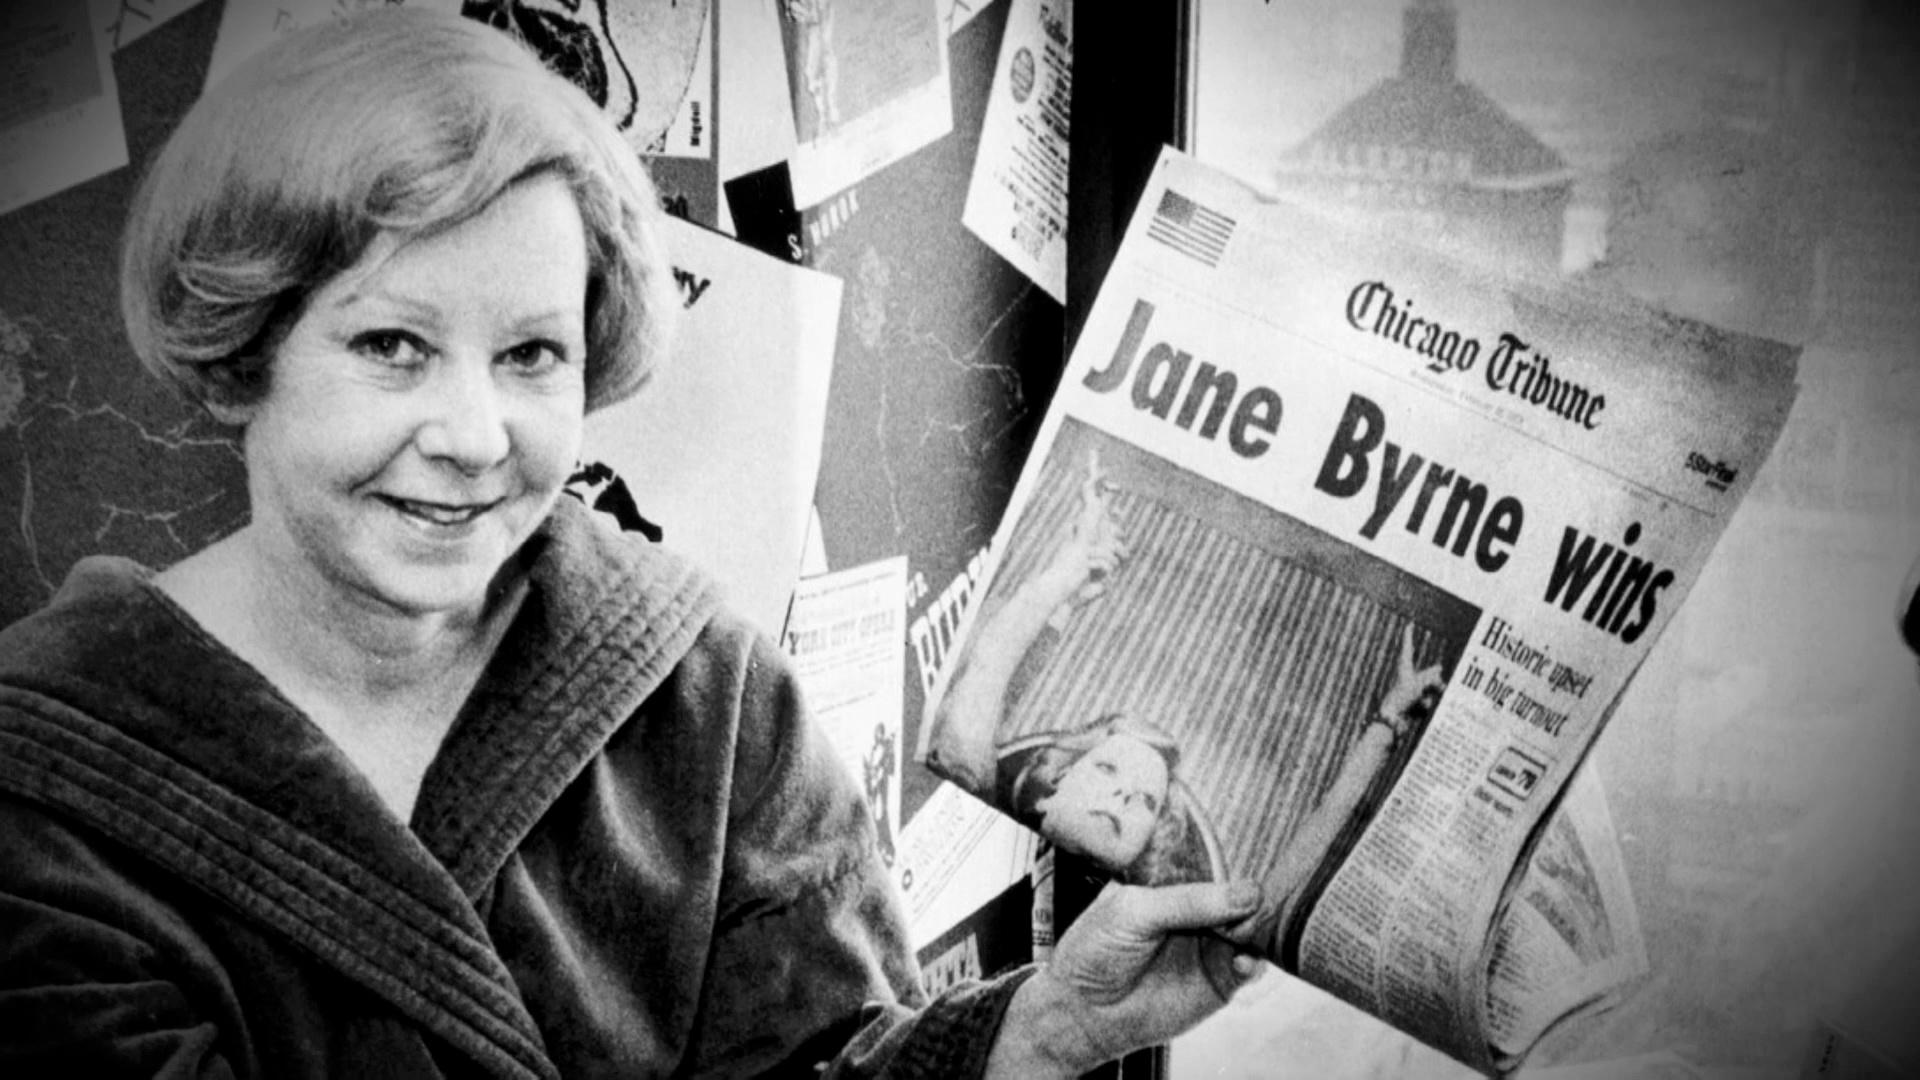 Jane Byrne collage with edition of Chicago Tribune and 'Jane Byrne wins' headline